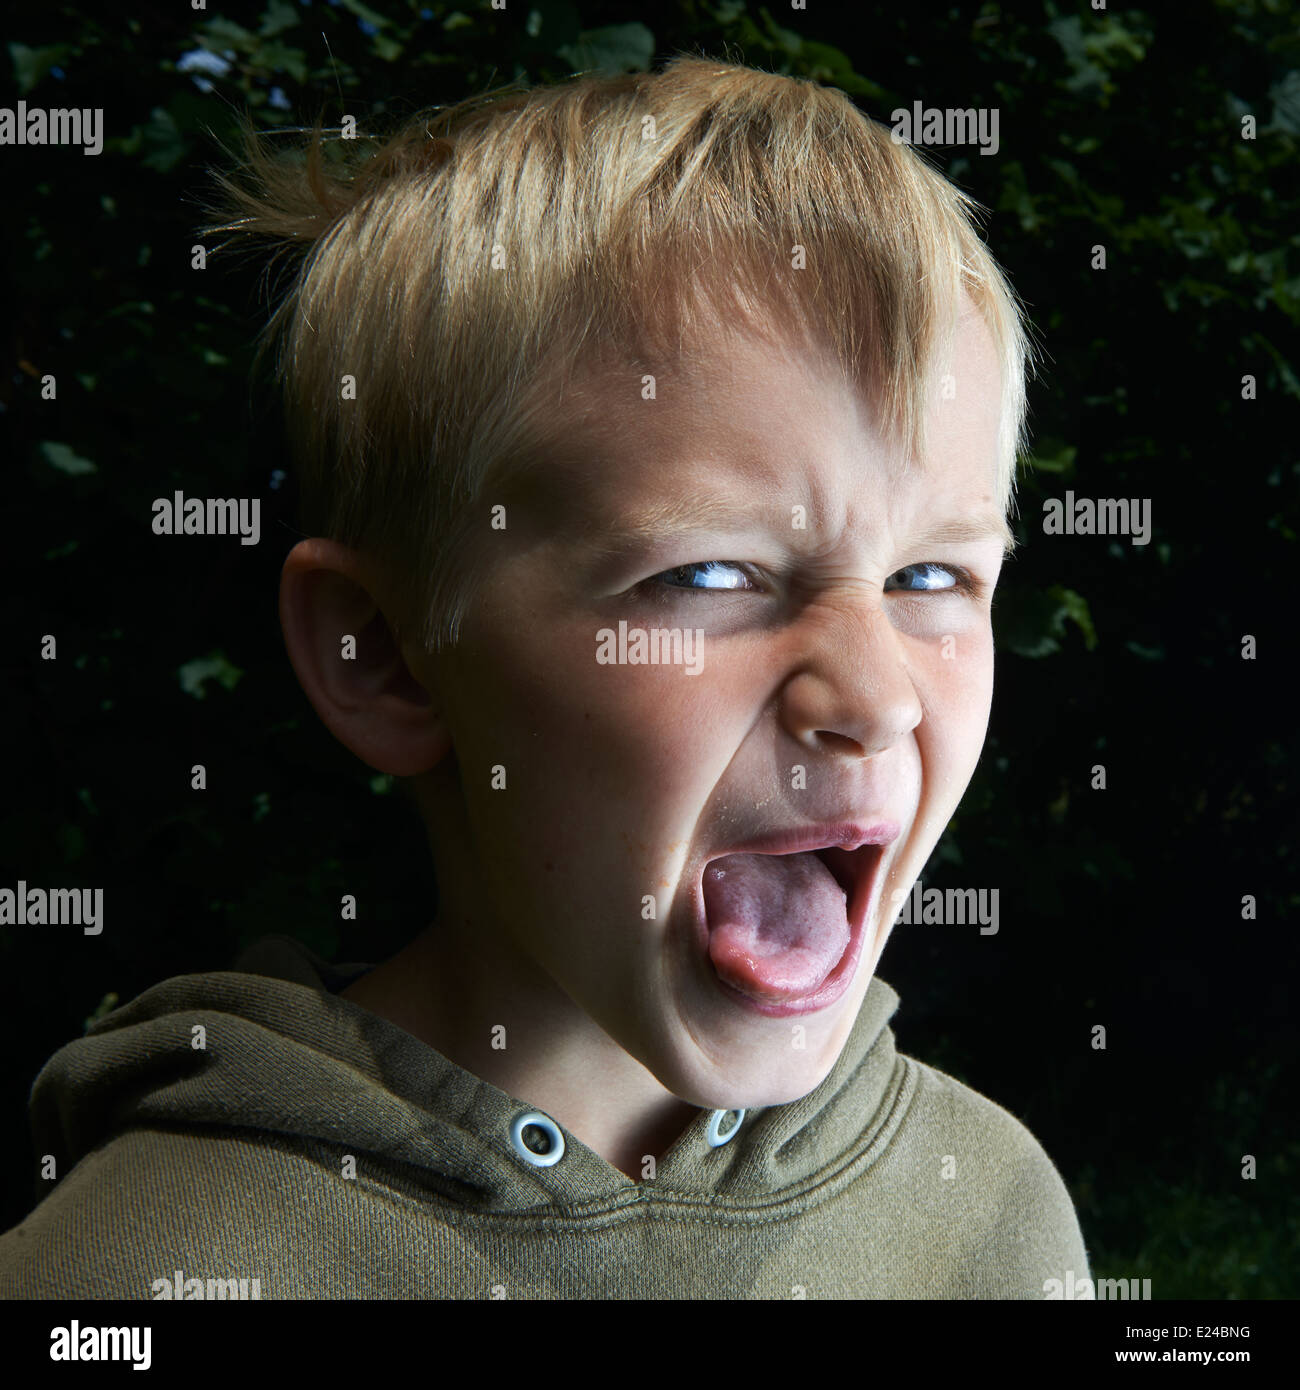 Silly young child blond boy gruesomely grimacing for camera Stock Photo